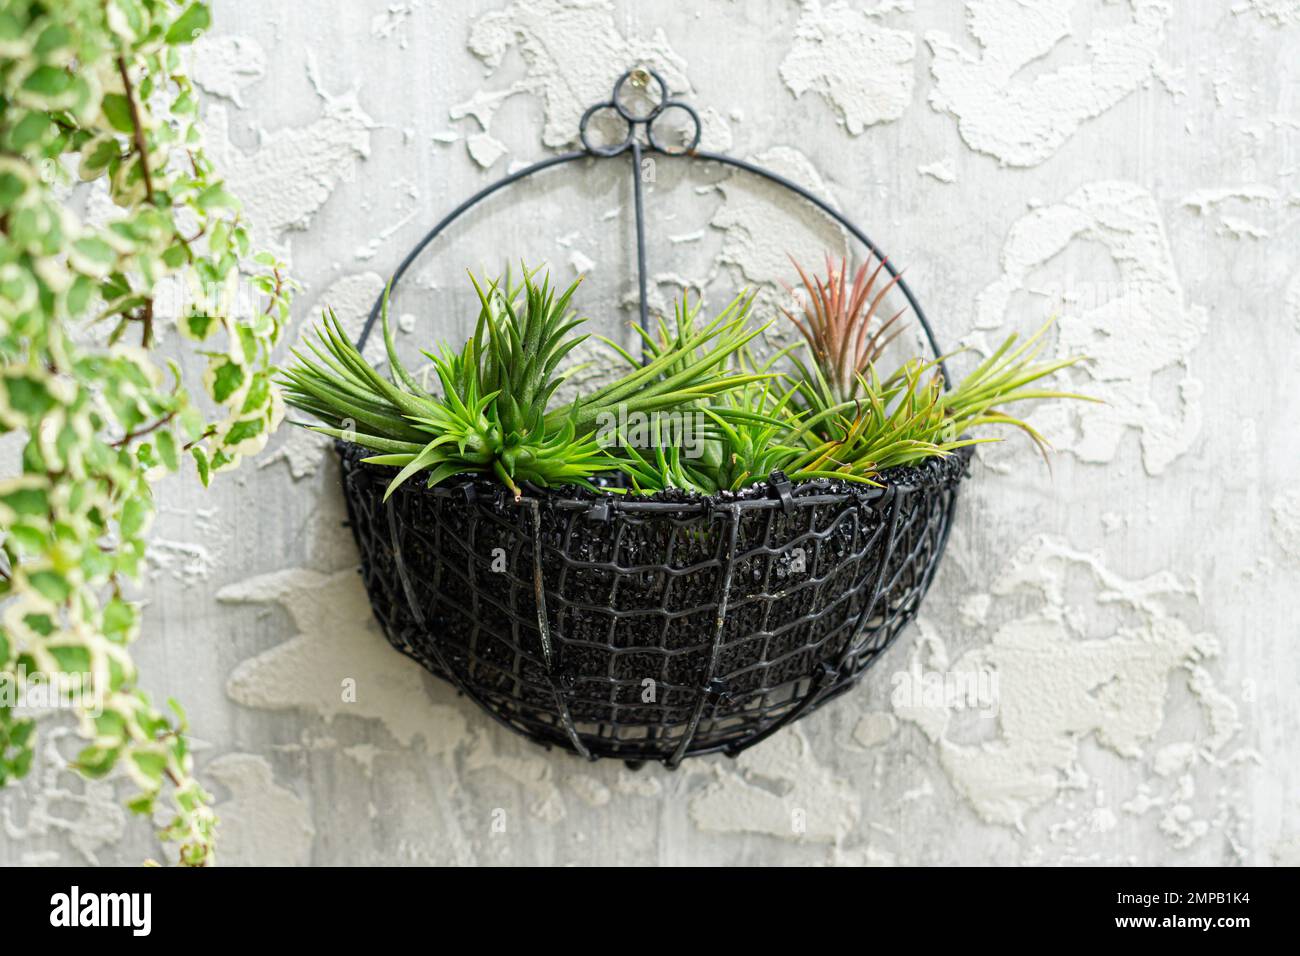 Sky plant air plant hanging pot in gray concrete bavkground Stock Photo